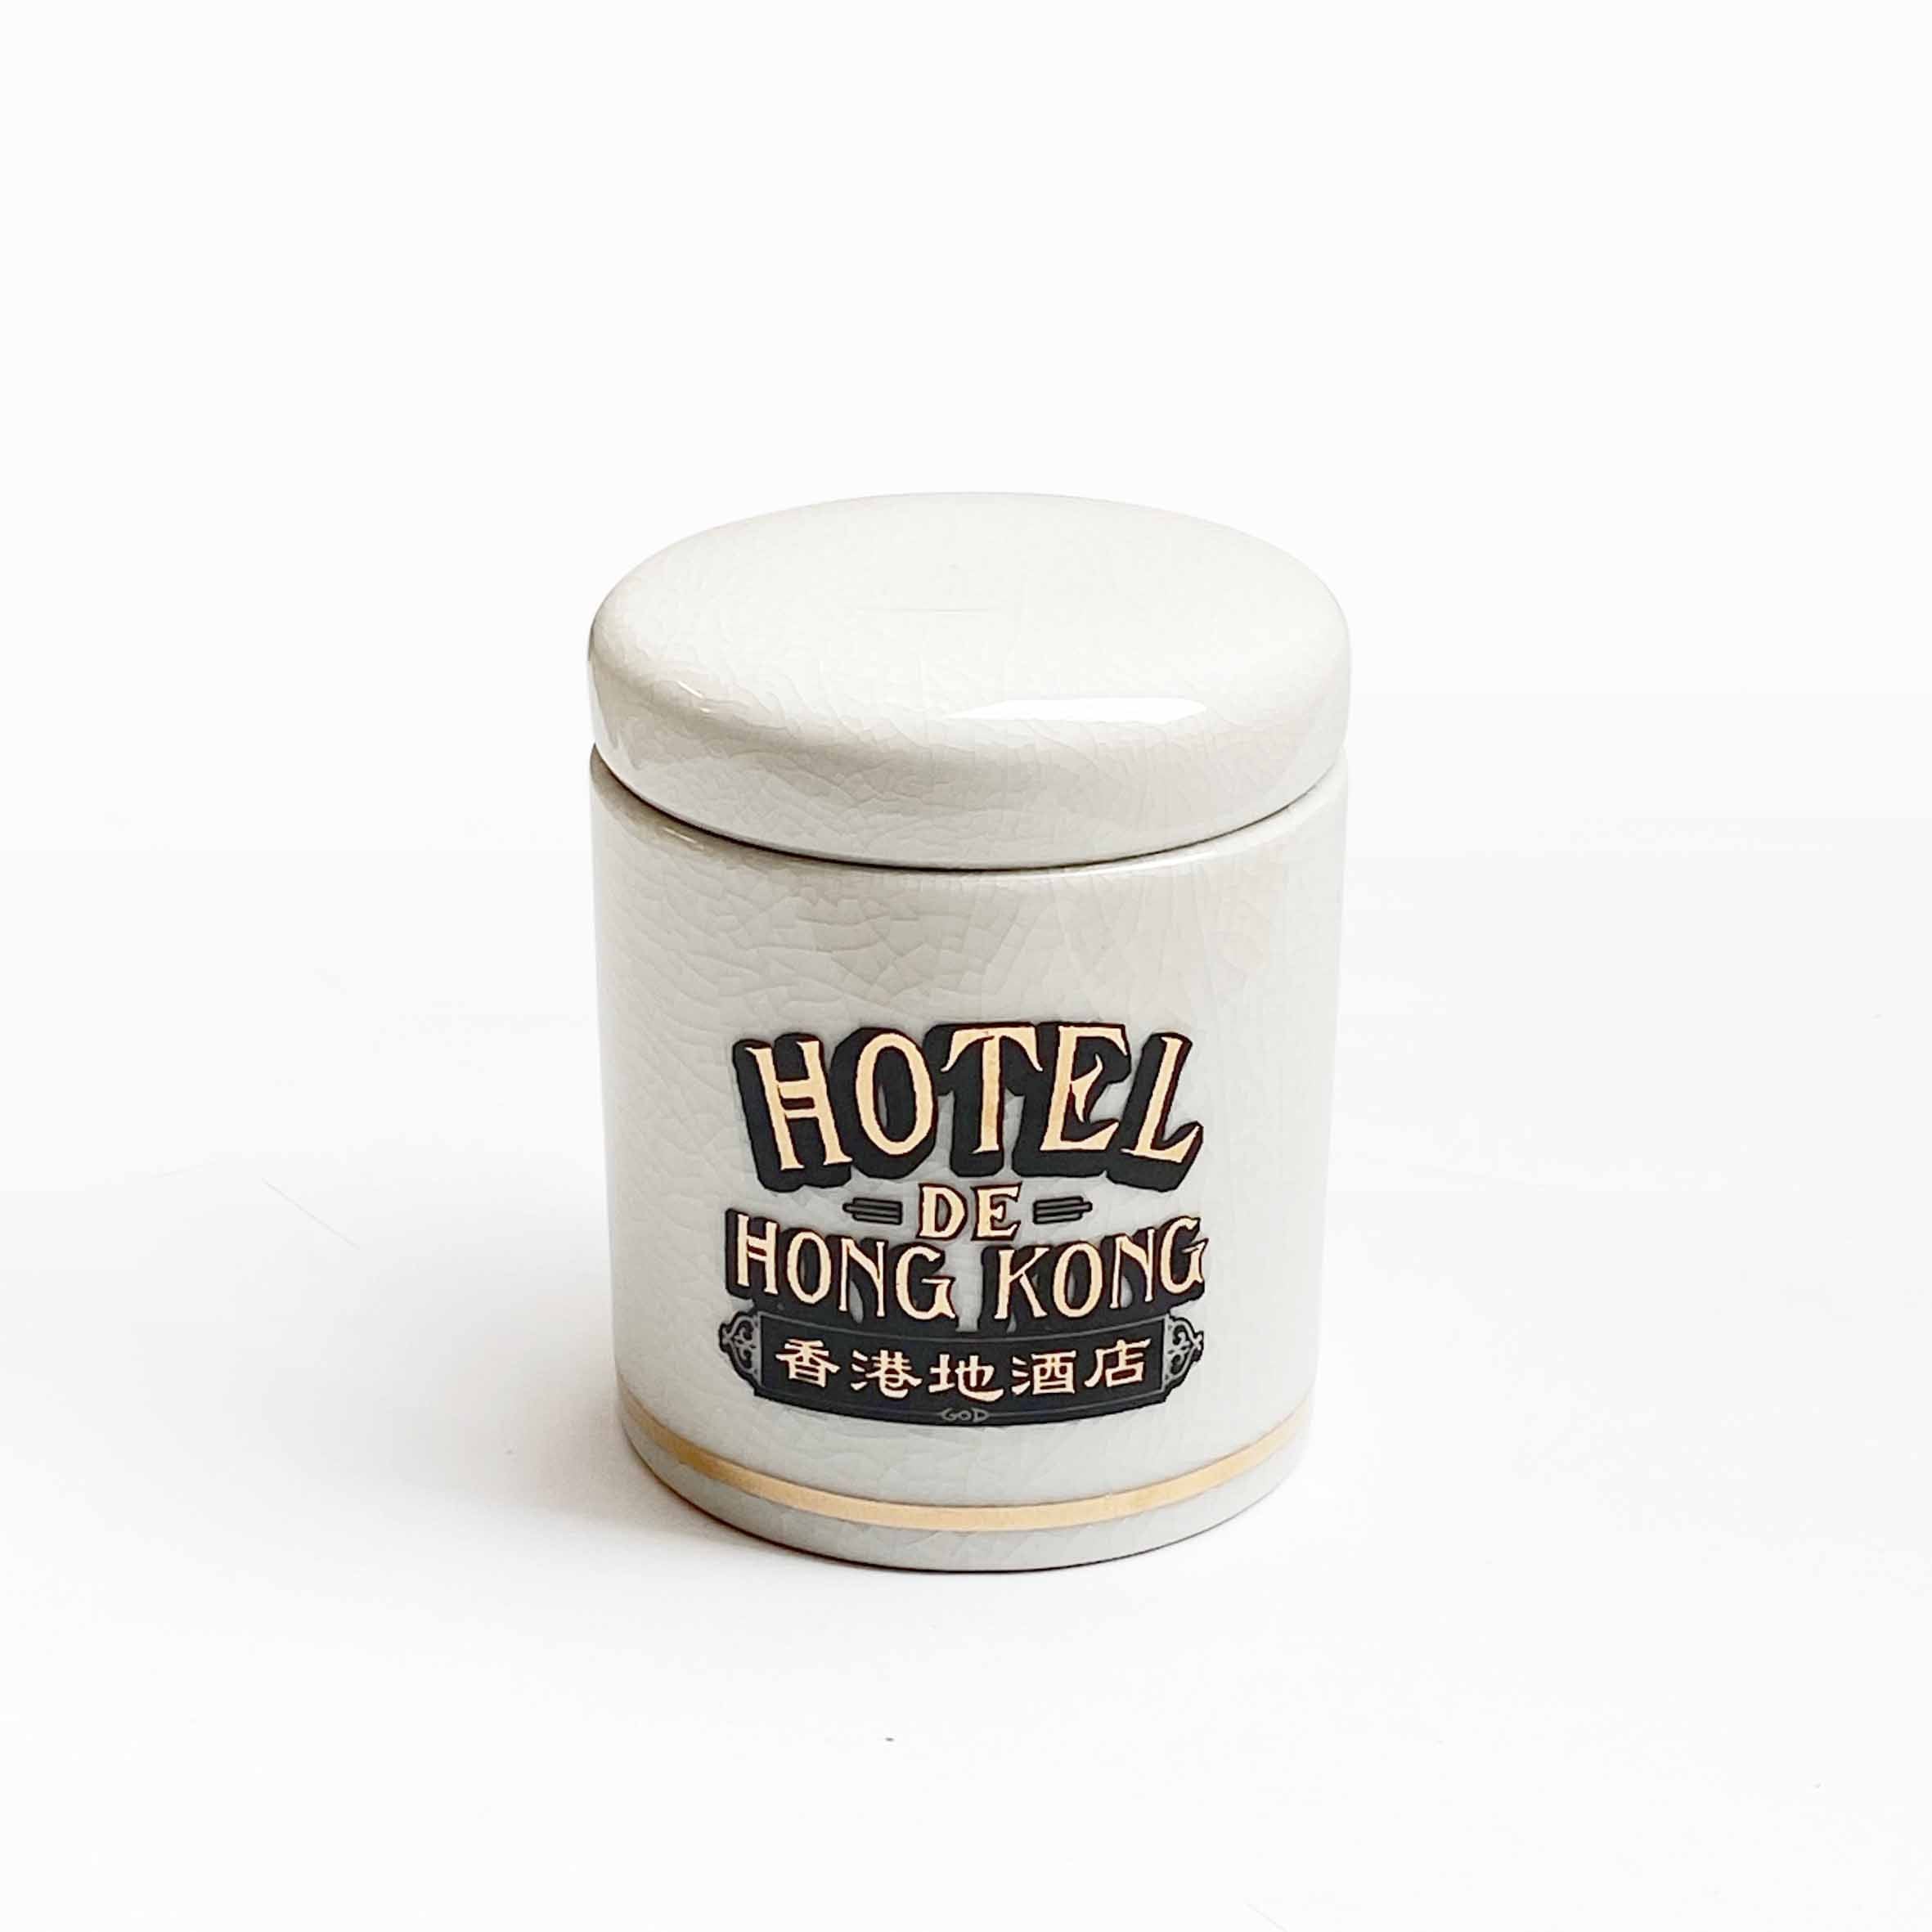 Hotel De Hong Kong Hand Painted Round Container